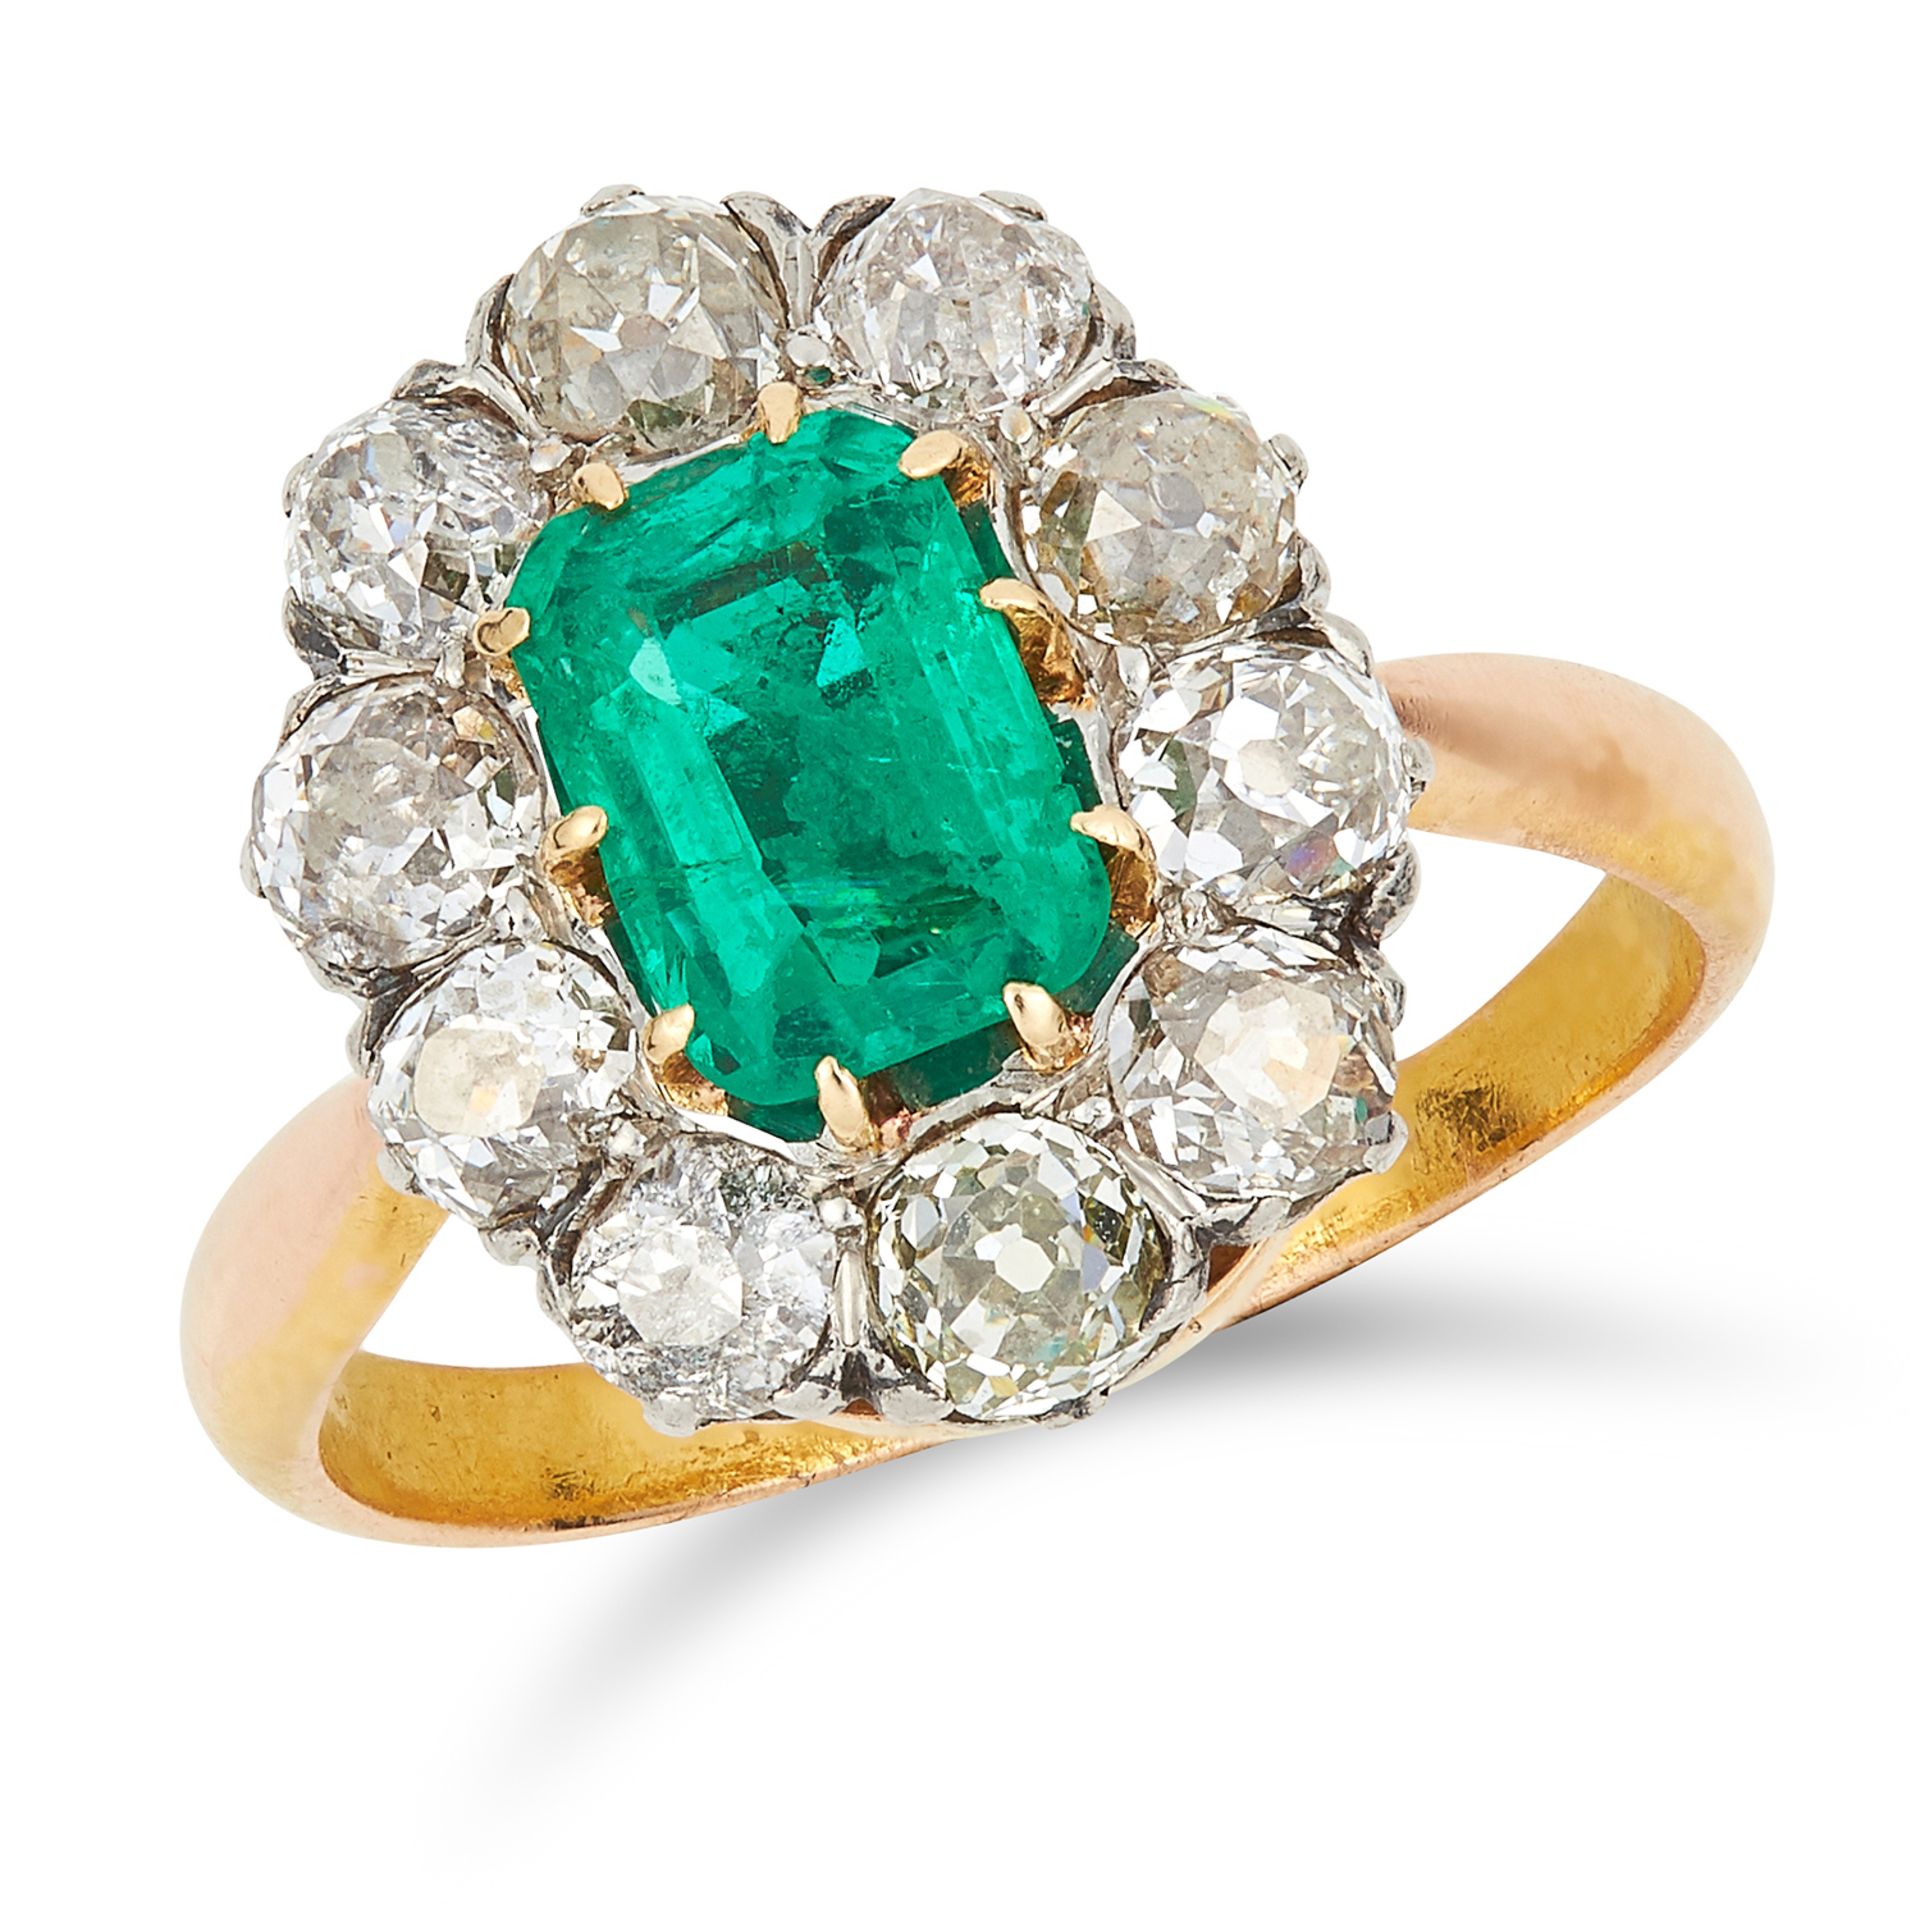 ANTIQUE COLOMBIAN EMERALD AND DIAMOND CLUSTER RING set with an emerald cut emerald of